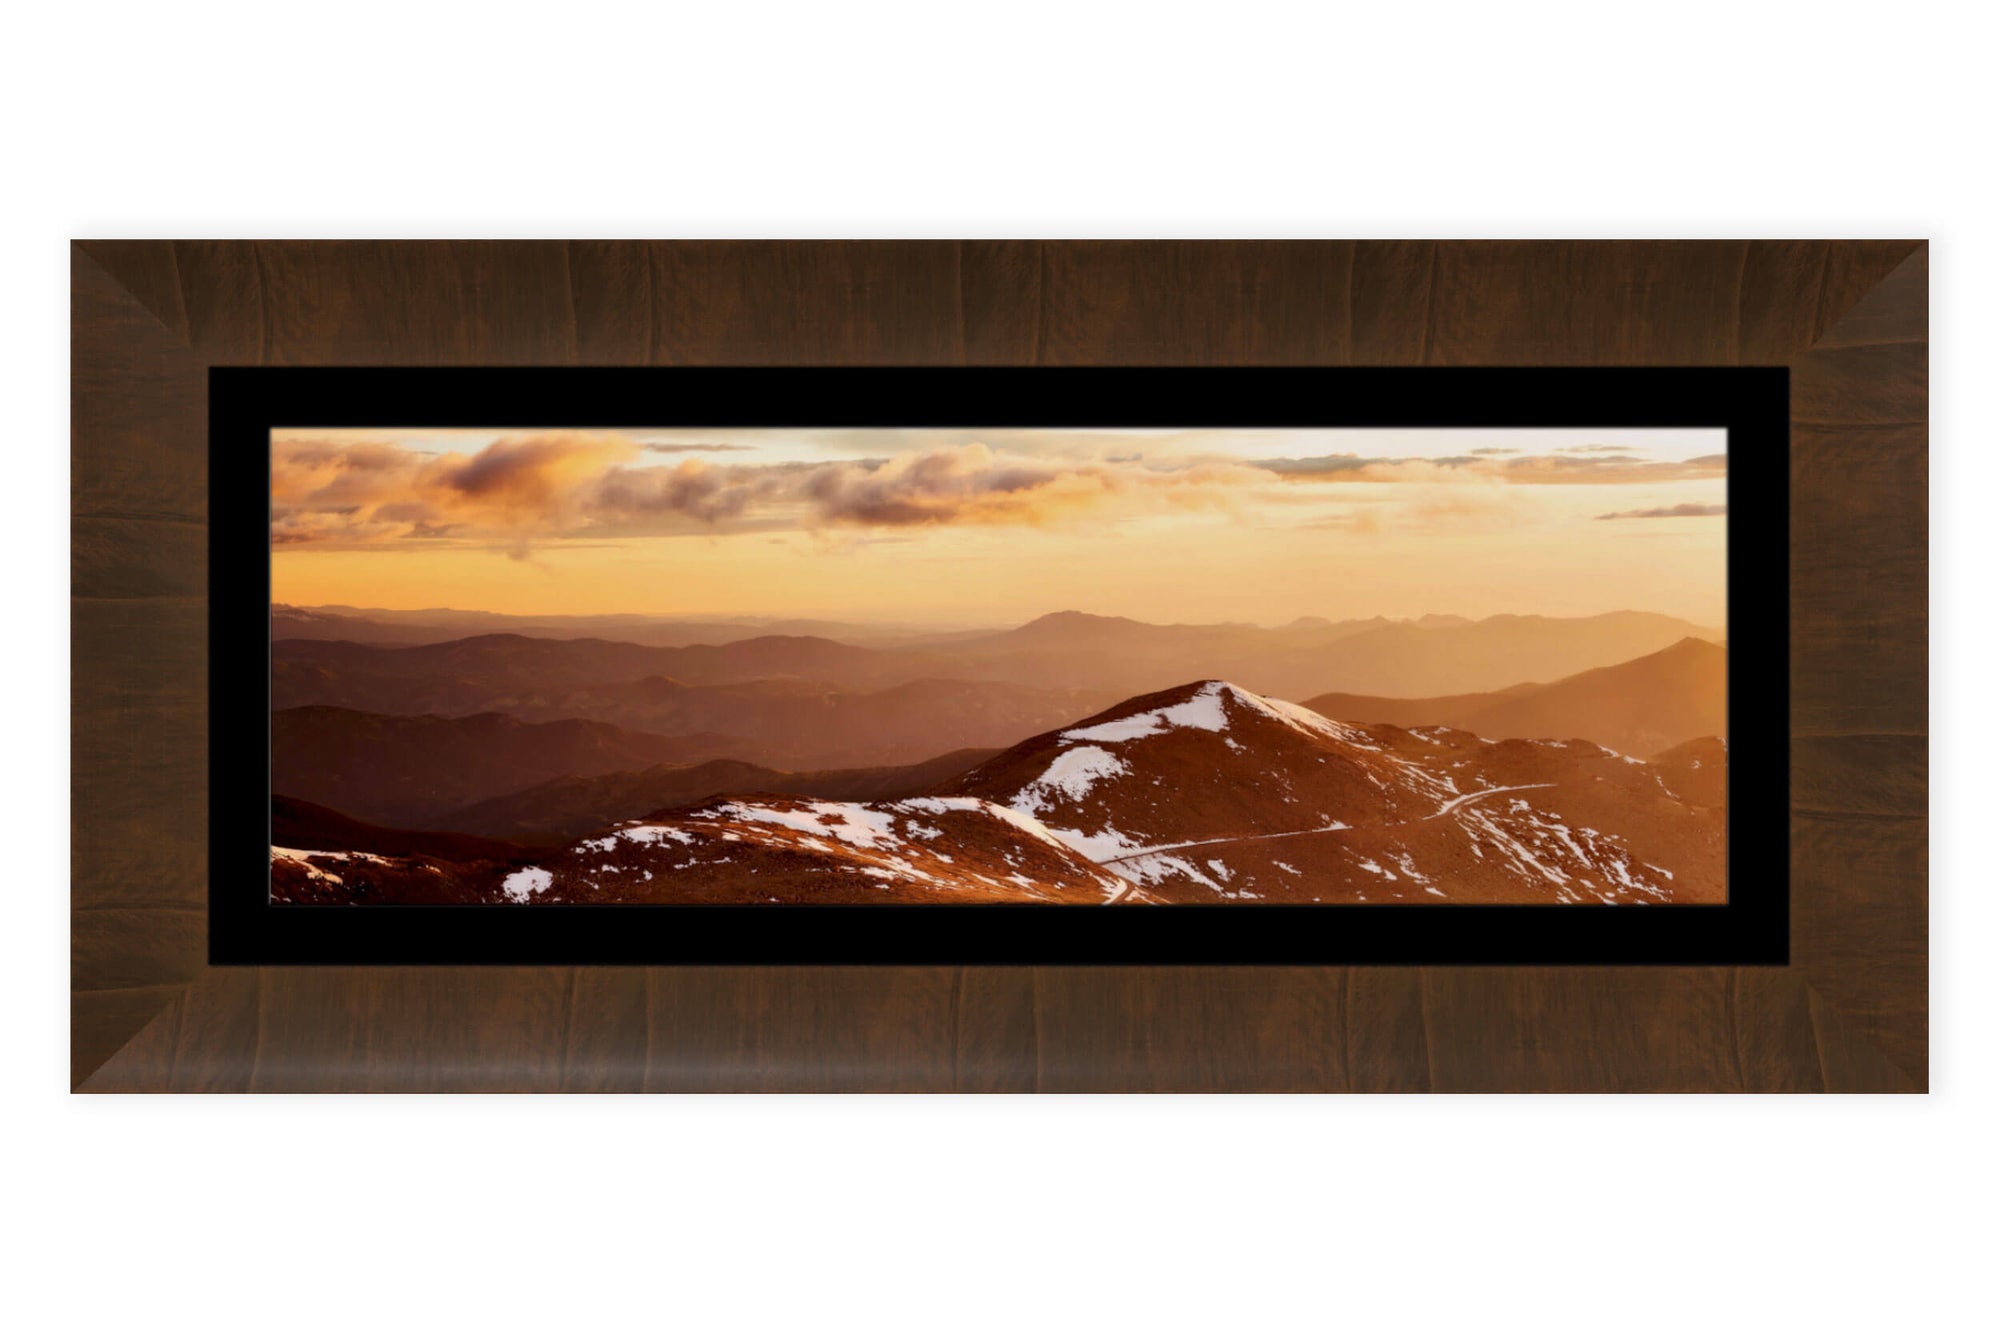 A piece of framed Colorado art shows a sunrise from Mount Evans looking toward Denver.